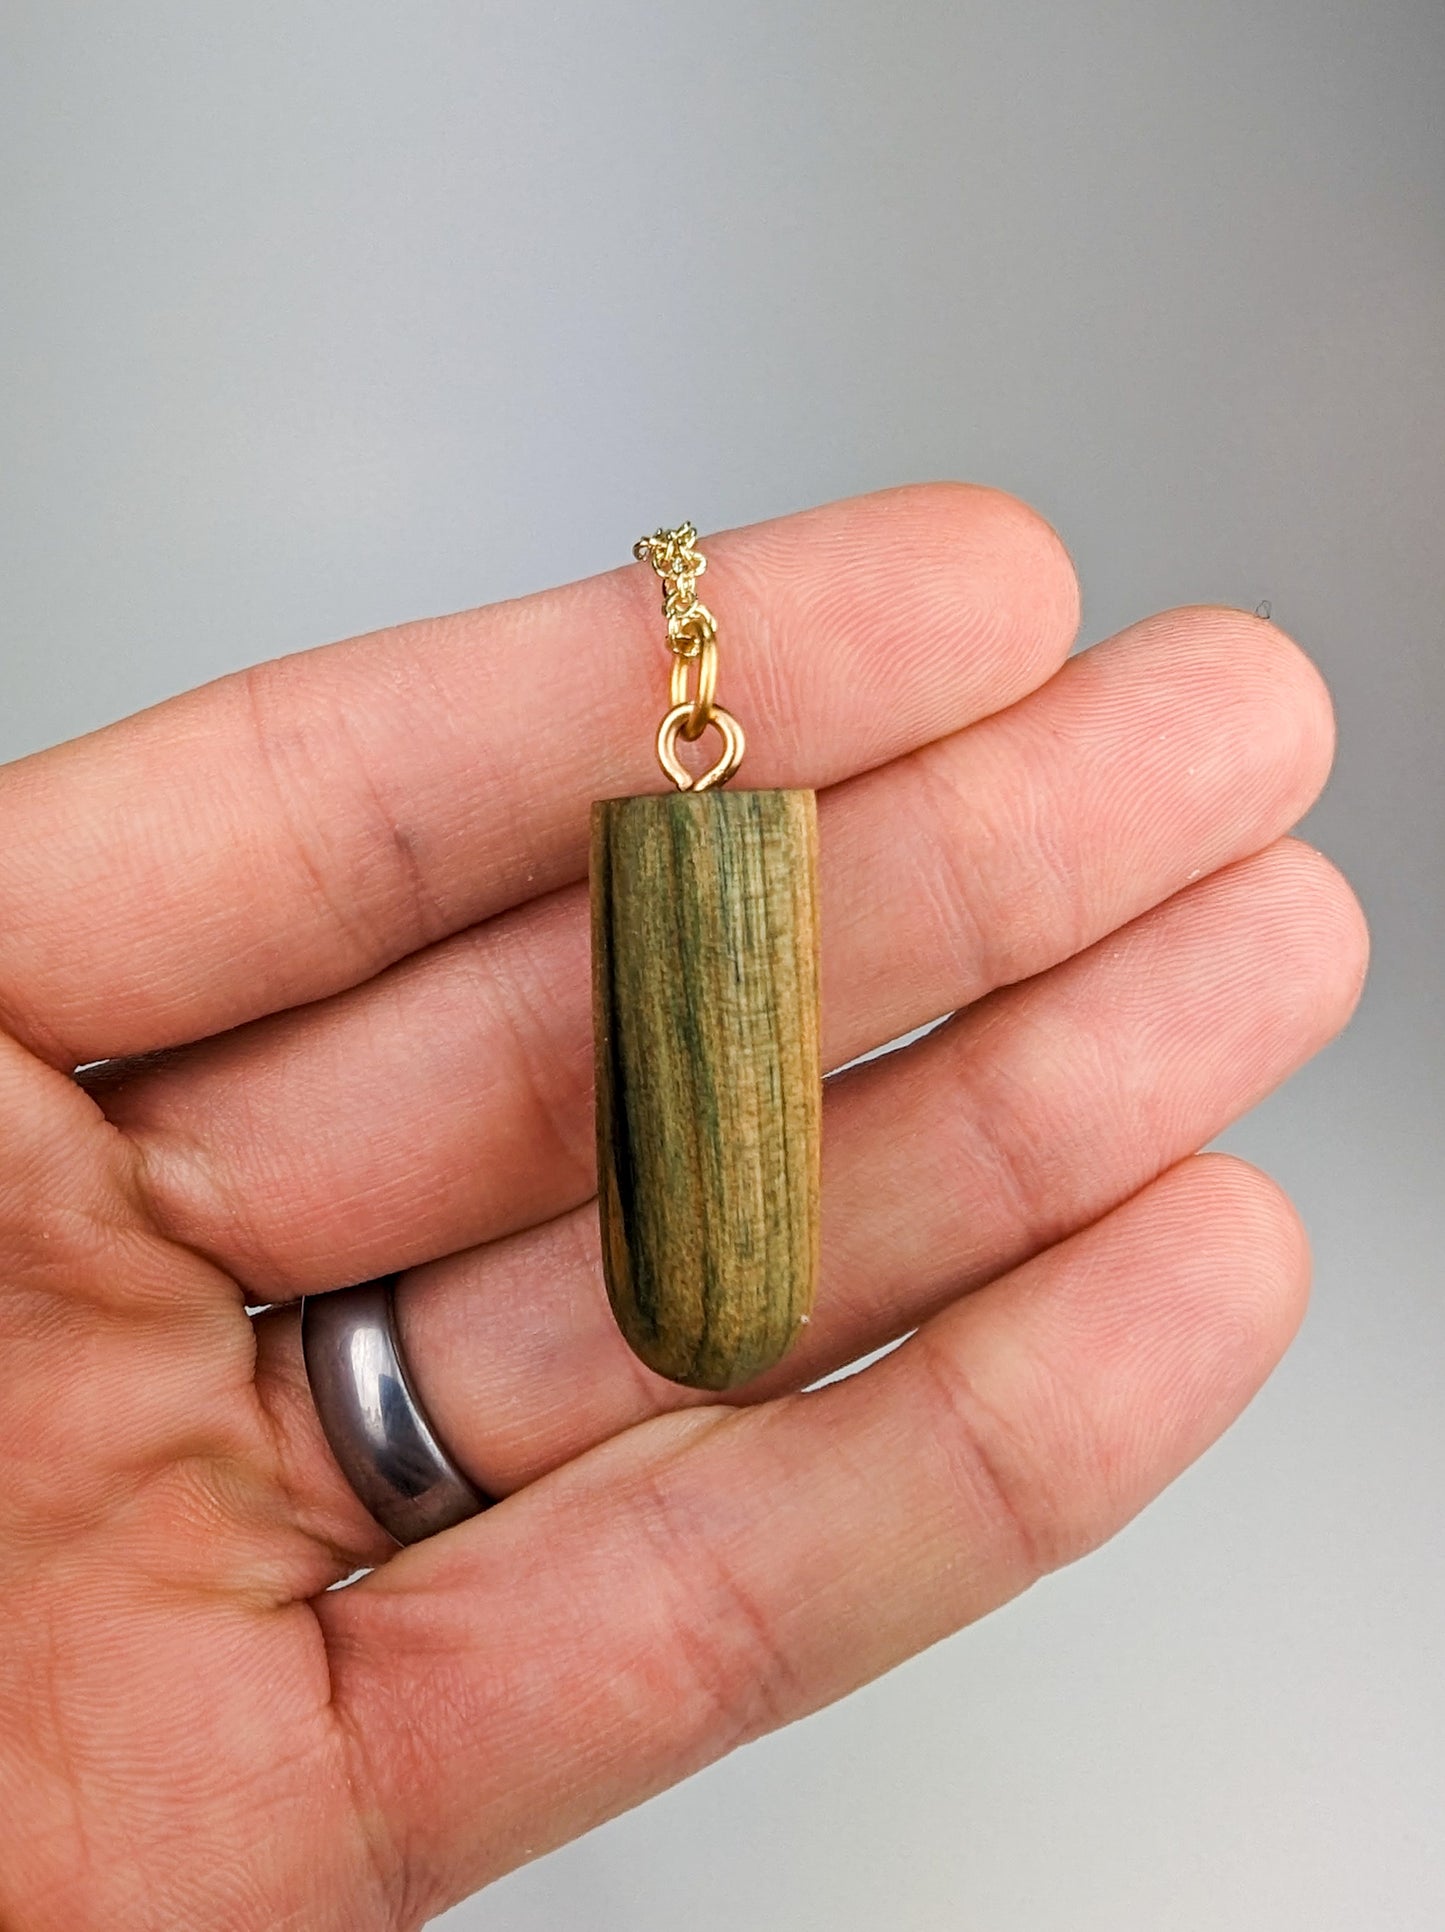 Naturally Fungus-Stained Wooden Pendant | Irregular Cylinder